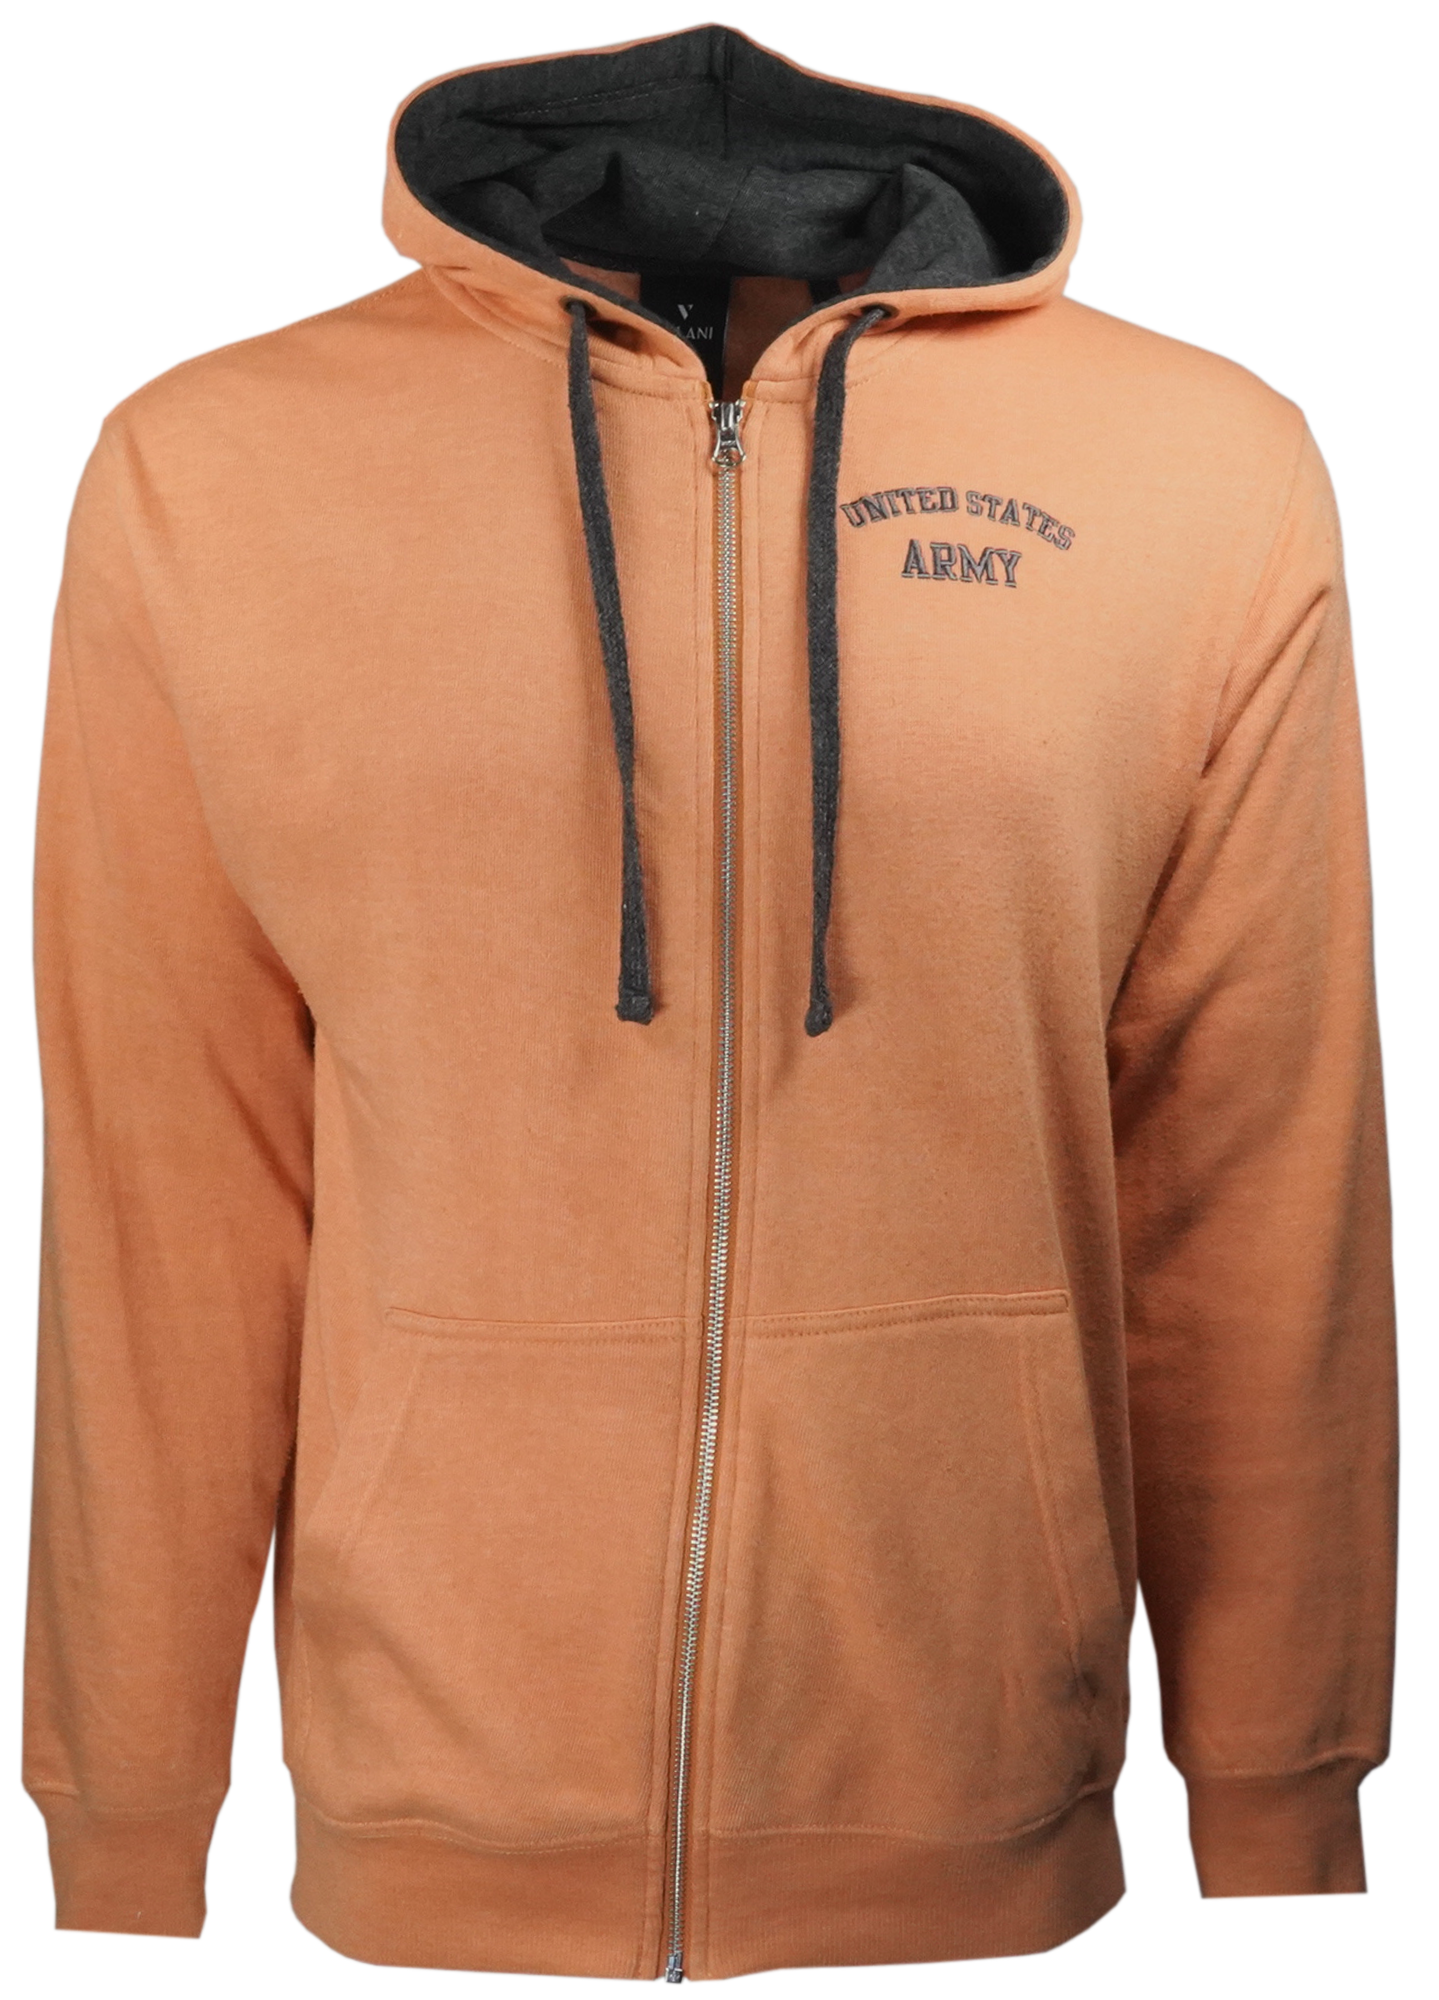 United States Army on Fleece Zip Up Hoodie